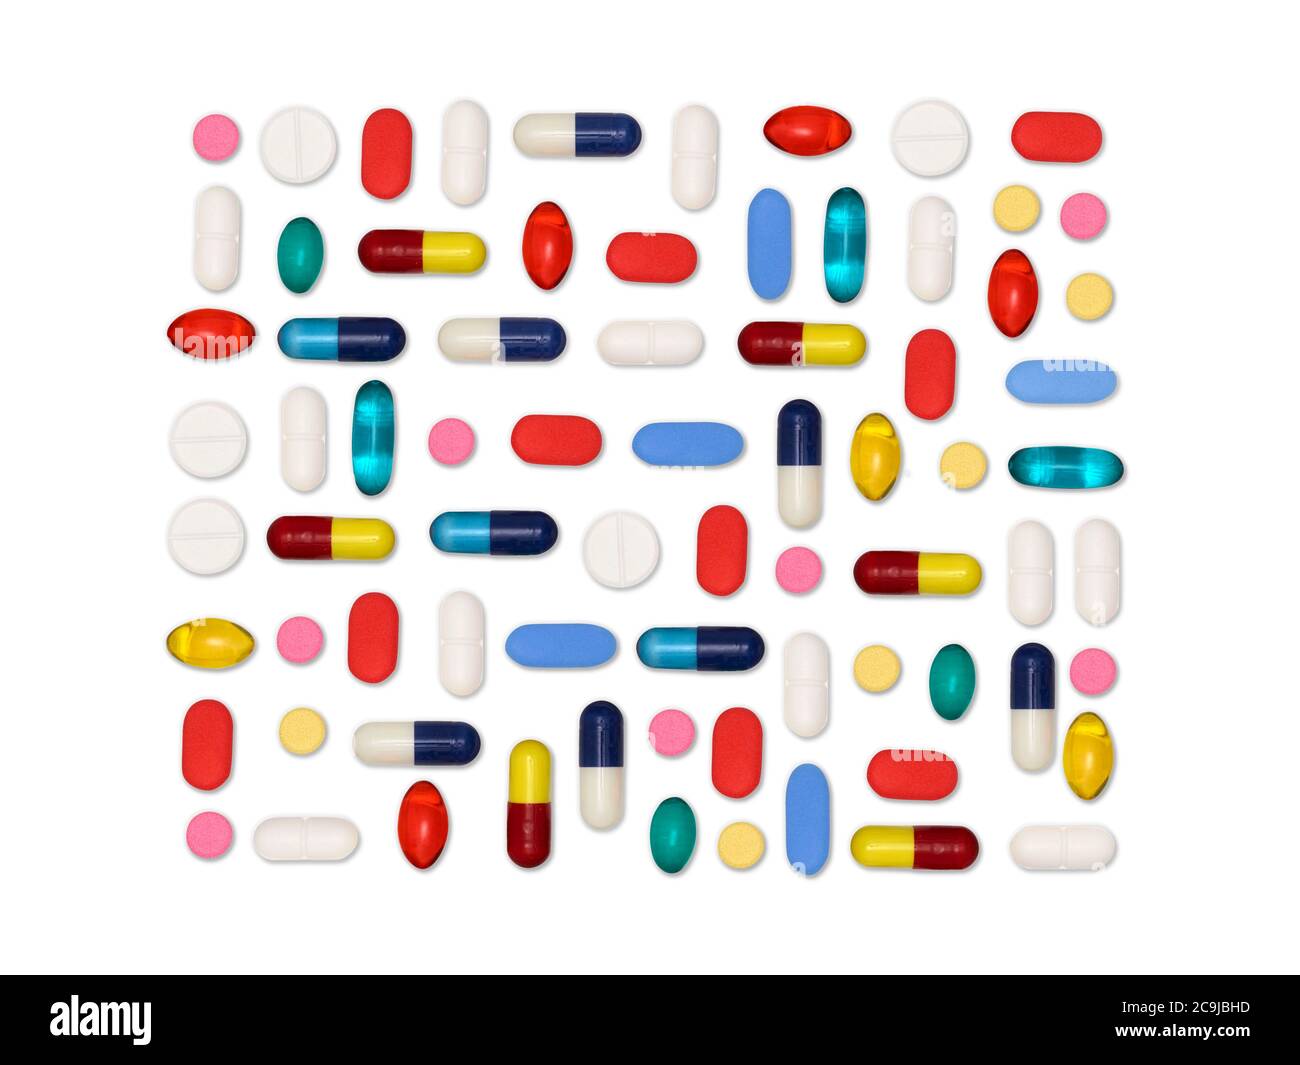 Pills and capsules against a white background. Stock Photo